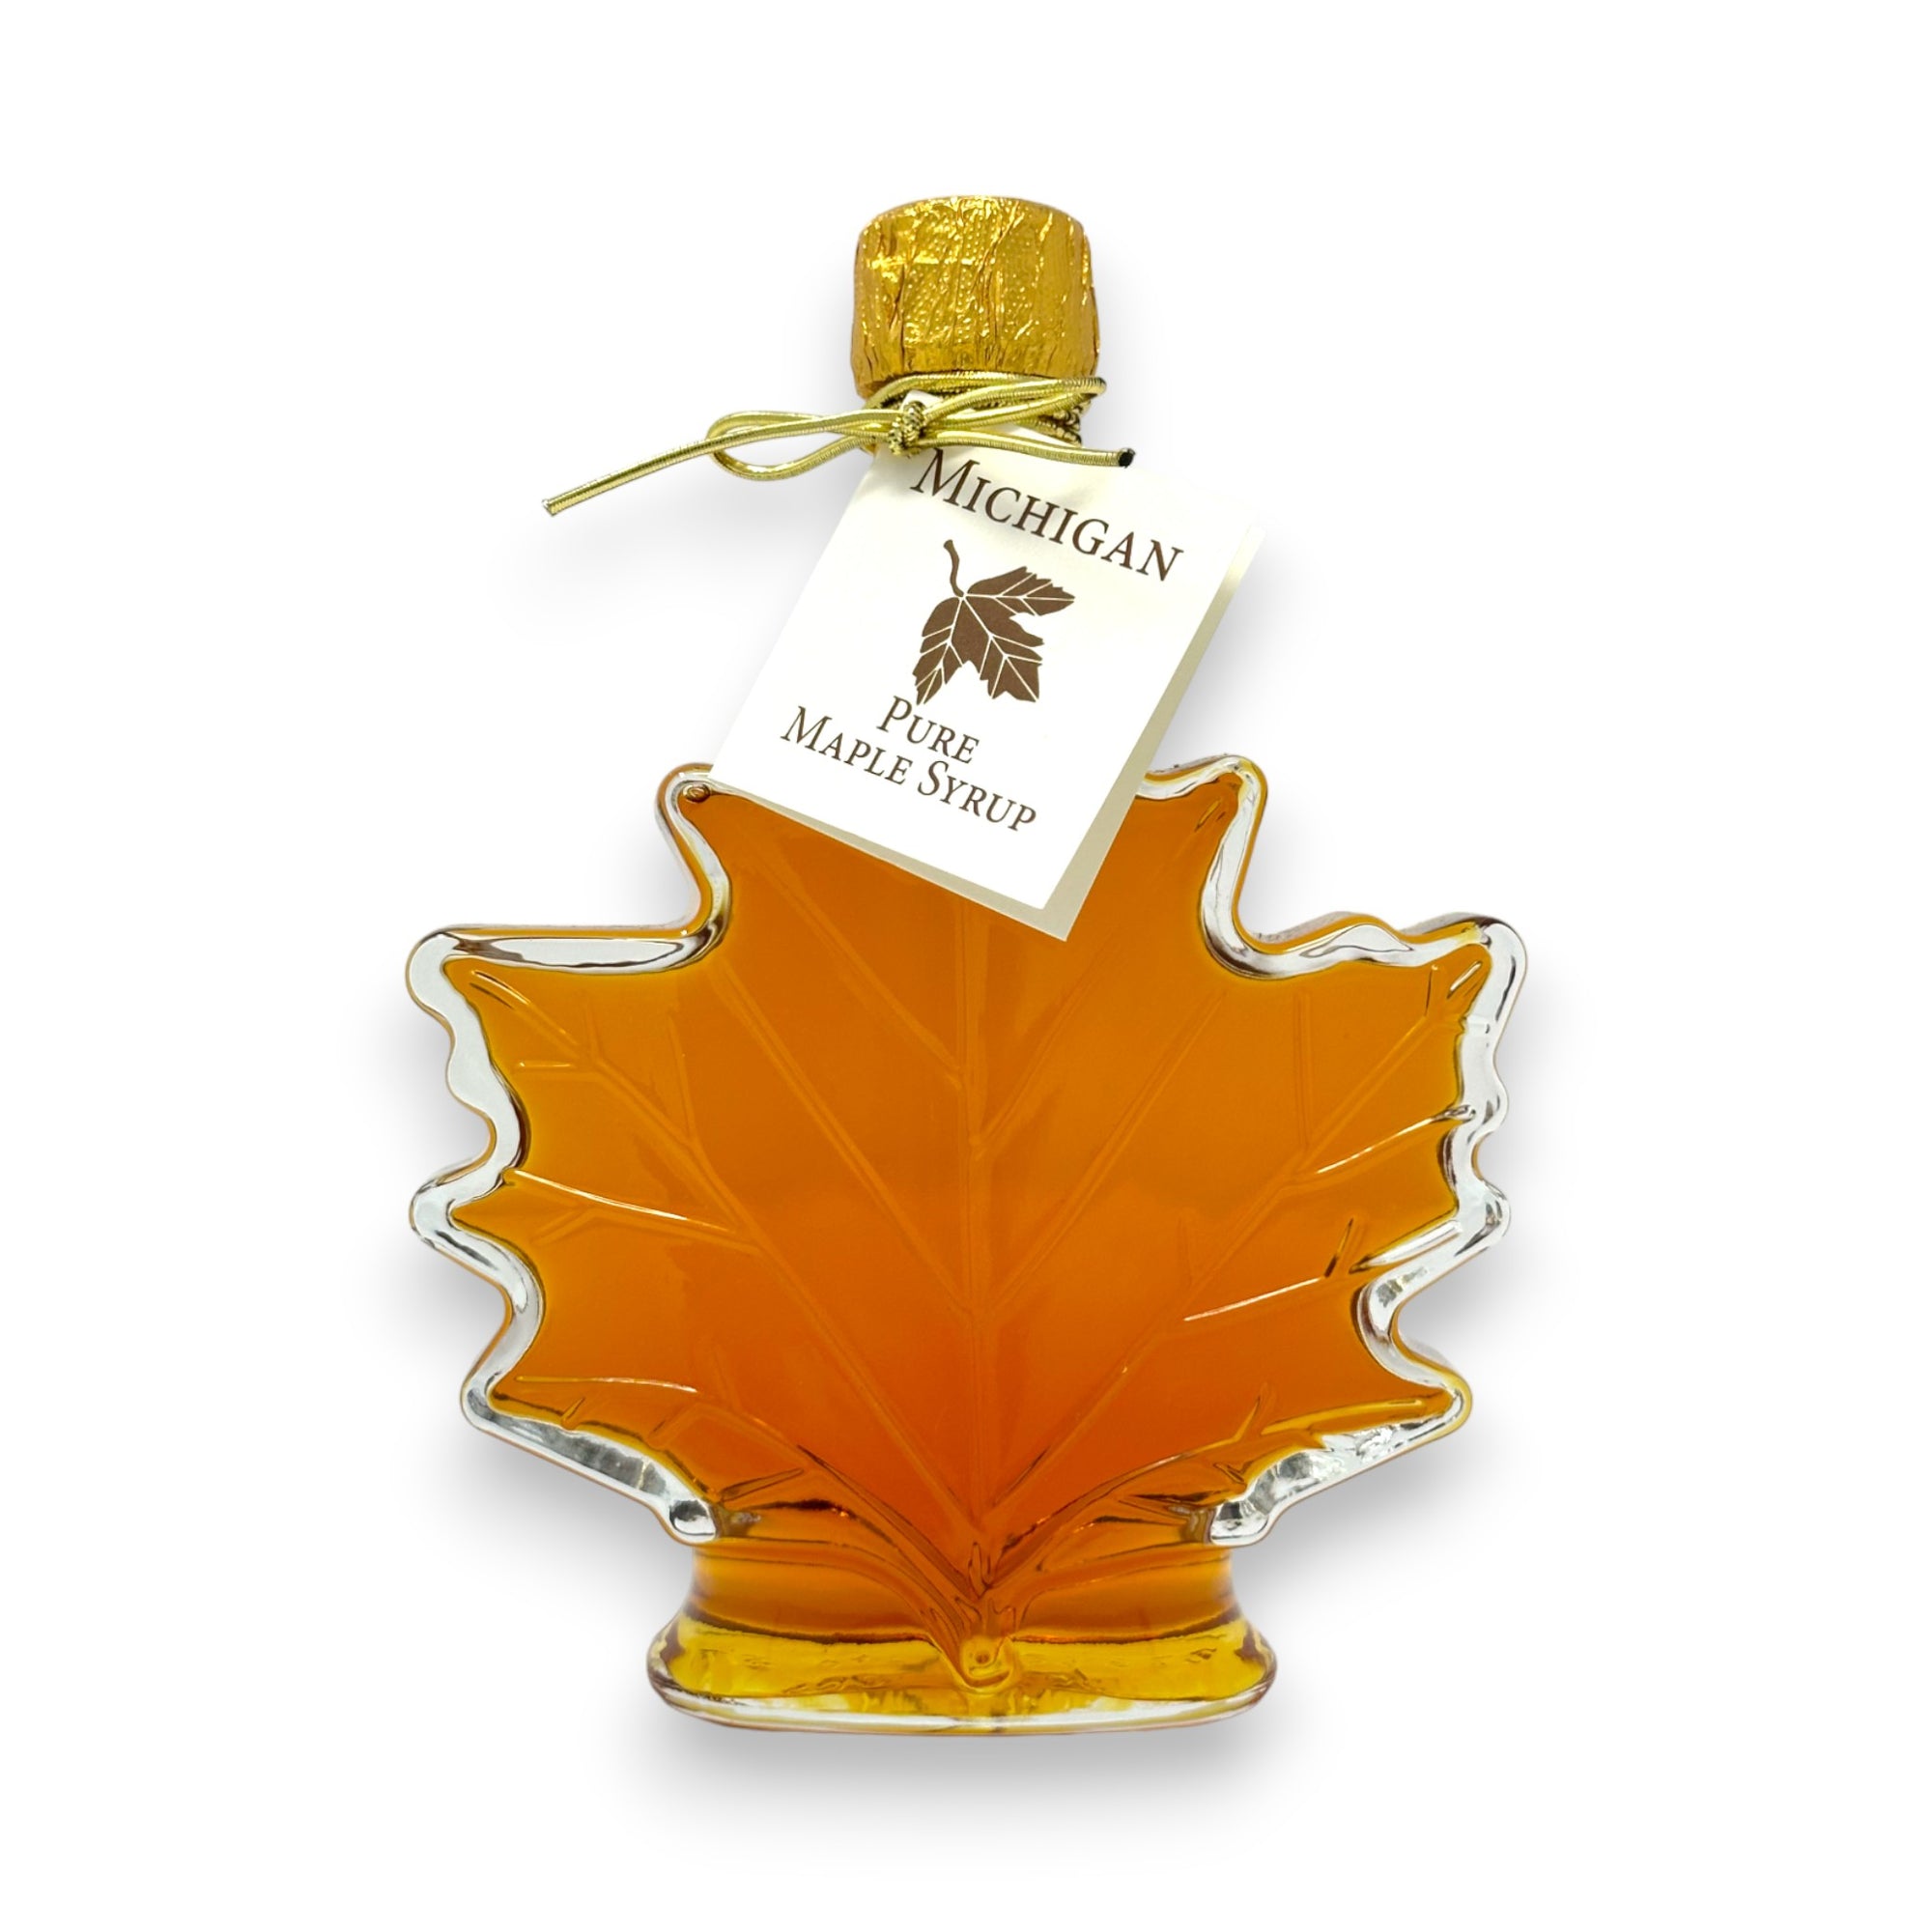 Pure Michigan Maple Syrup - Maple Leaf Glass Bottle.